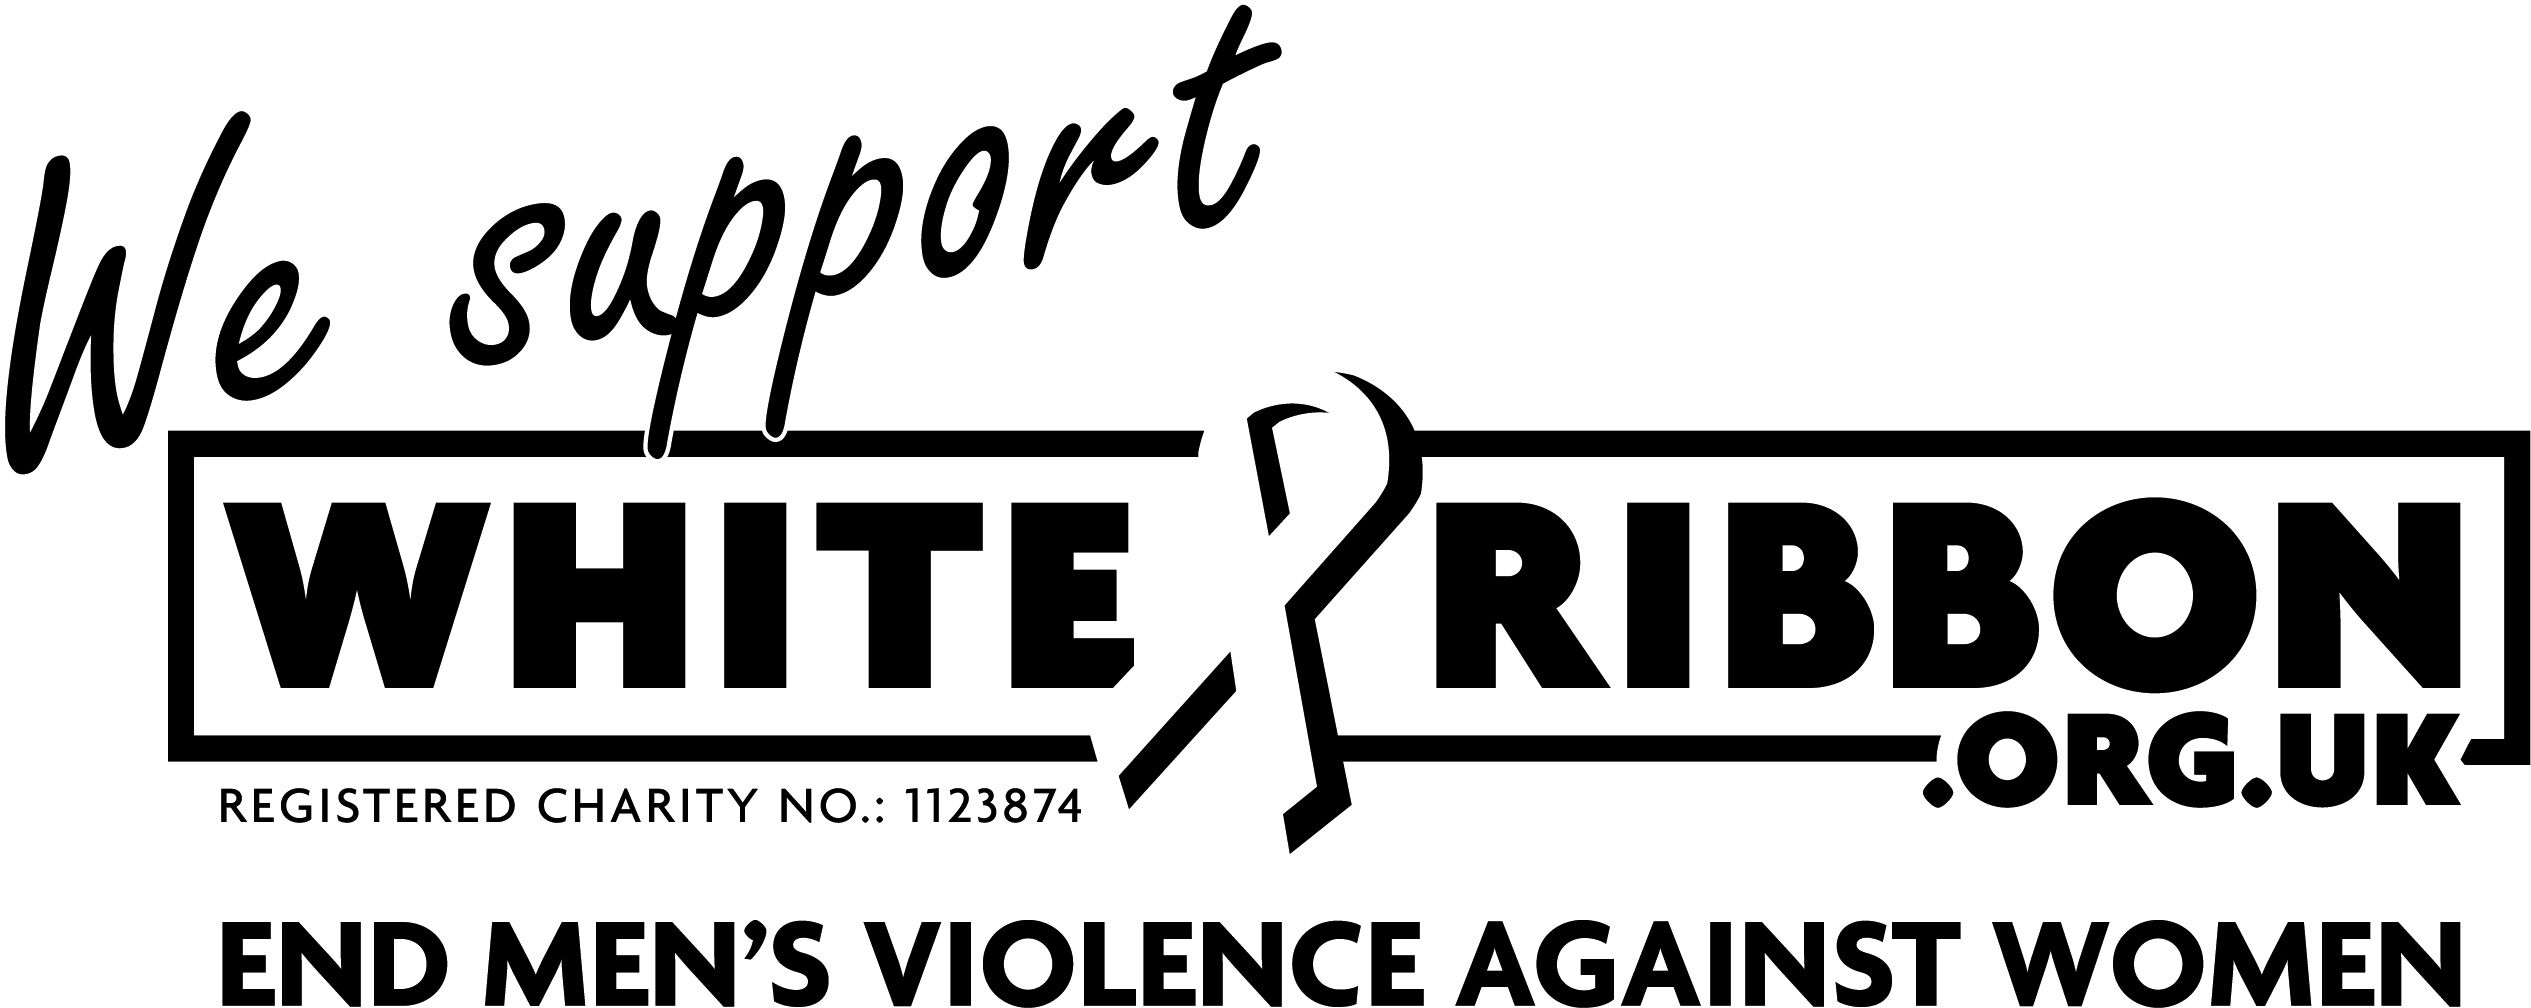 We support logo with tagline registered charity black